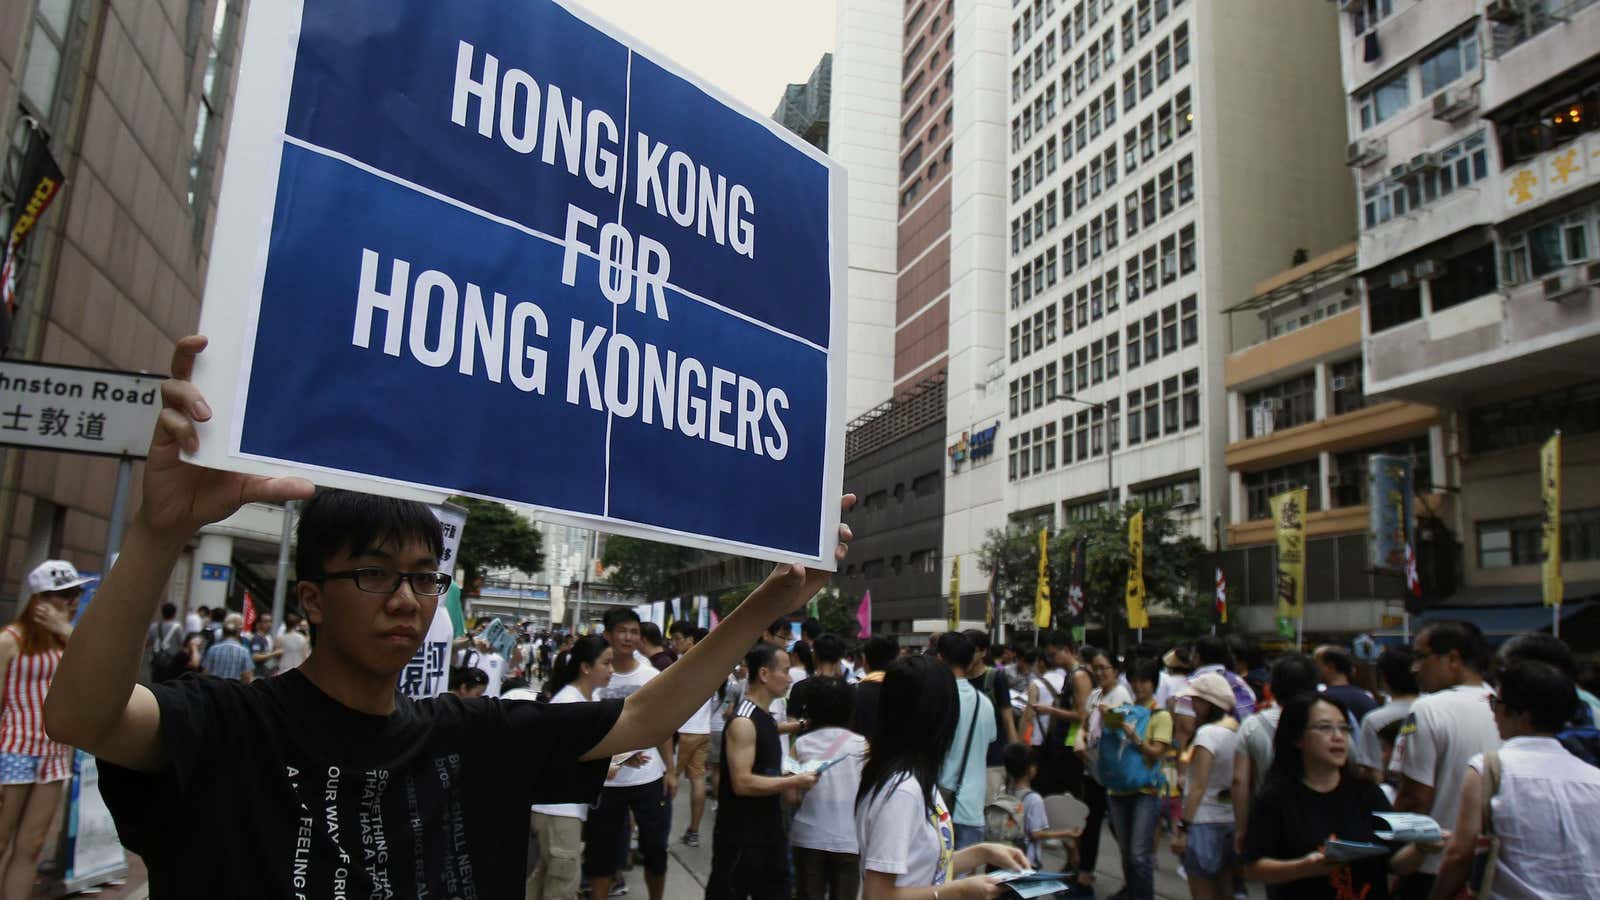 Student protesters want Hong Kong returned to its residents.